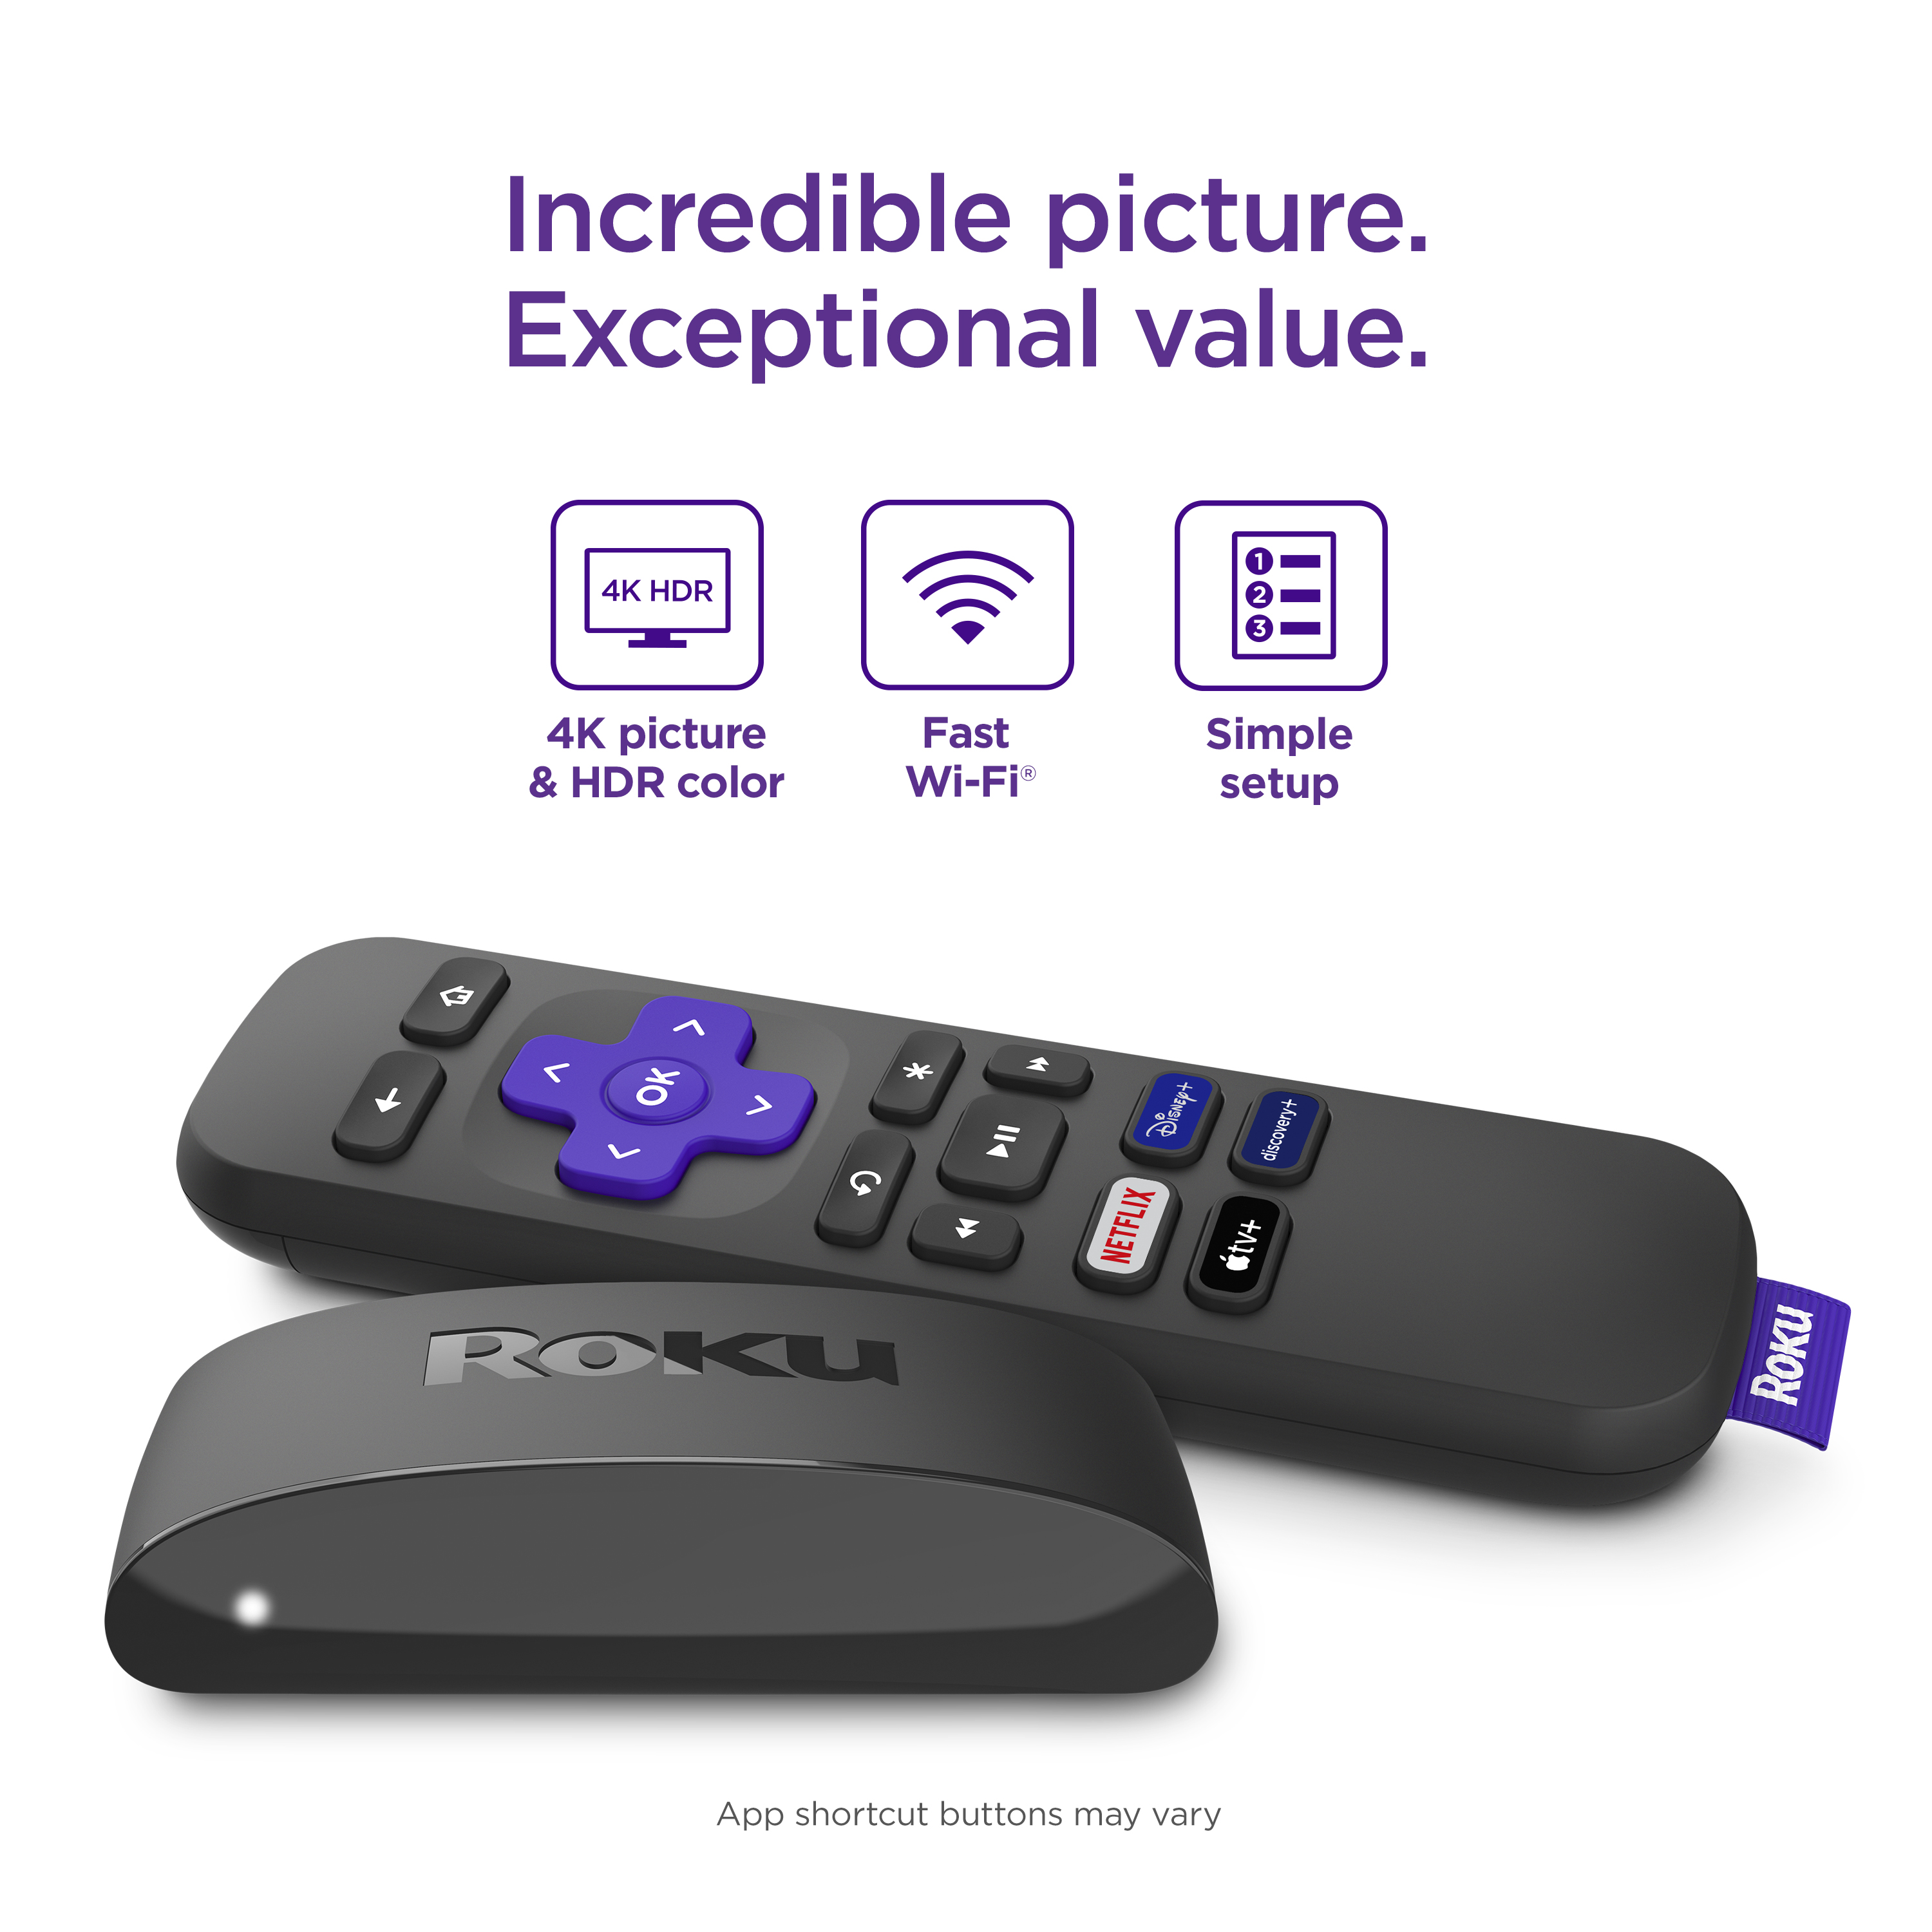 Roku Express 4K | Streaming Player HD/4K/HDR with Standard Remote featuring Shortcut Buttons - image 3 of 11